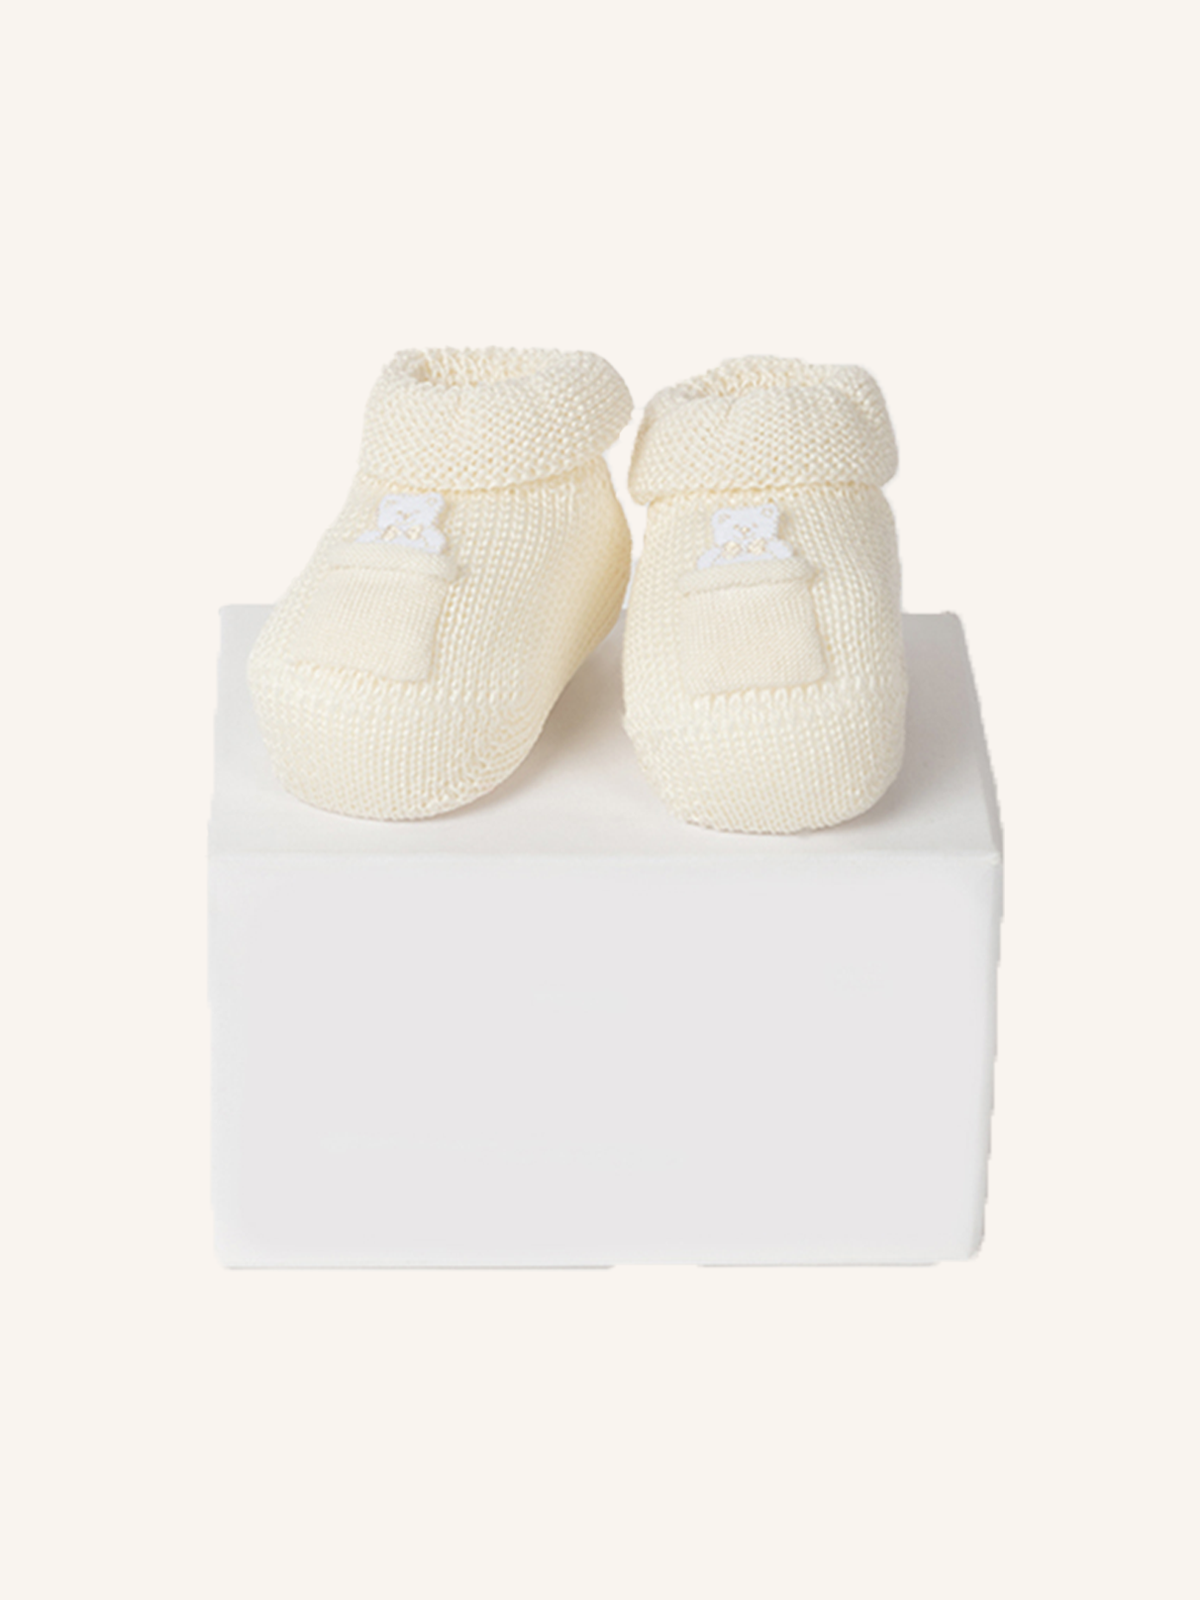 Slipper in Cotton with Pocket and Teddy Bear for Newborn | Solid Color | Pack of 1 Pair | 41621